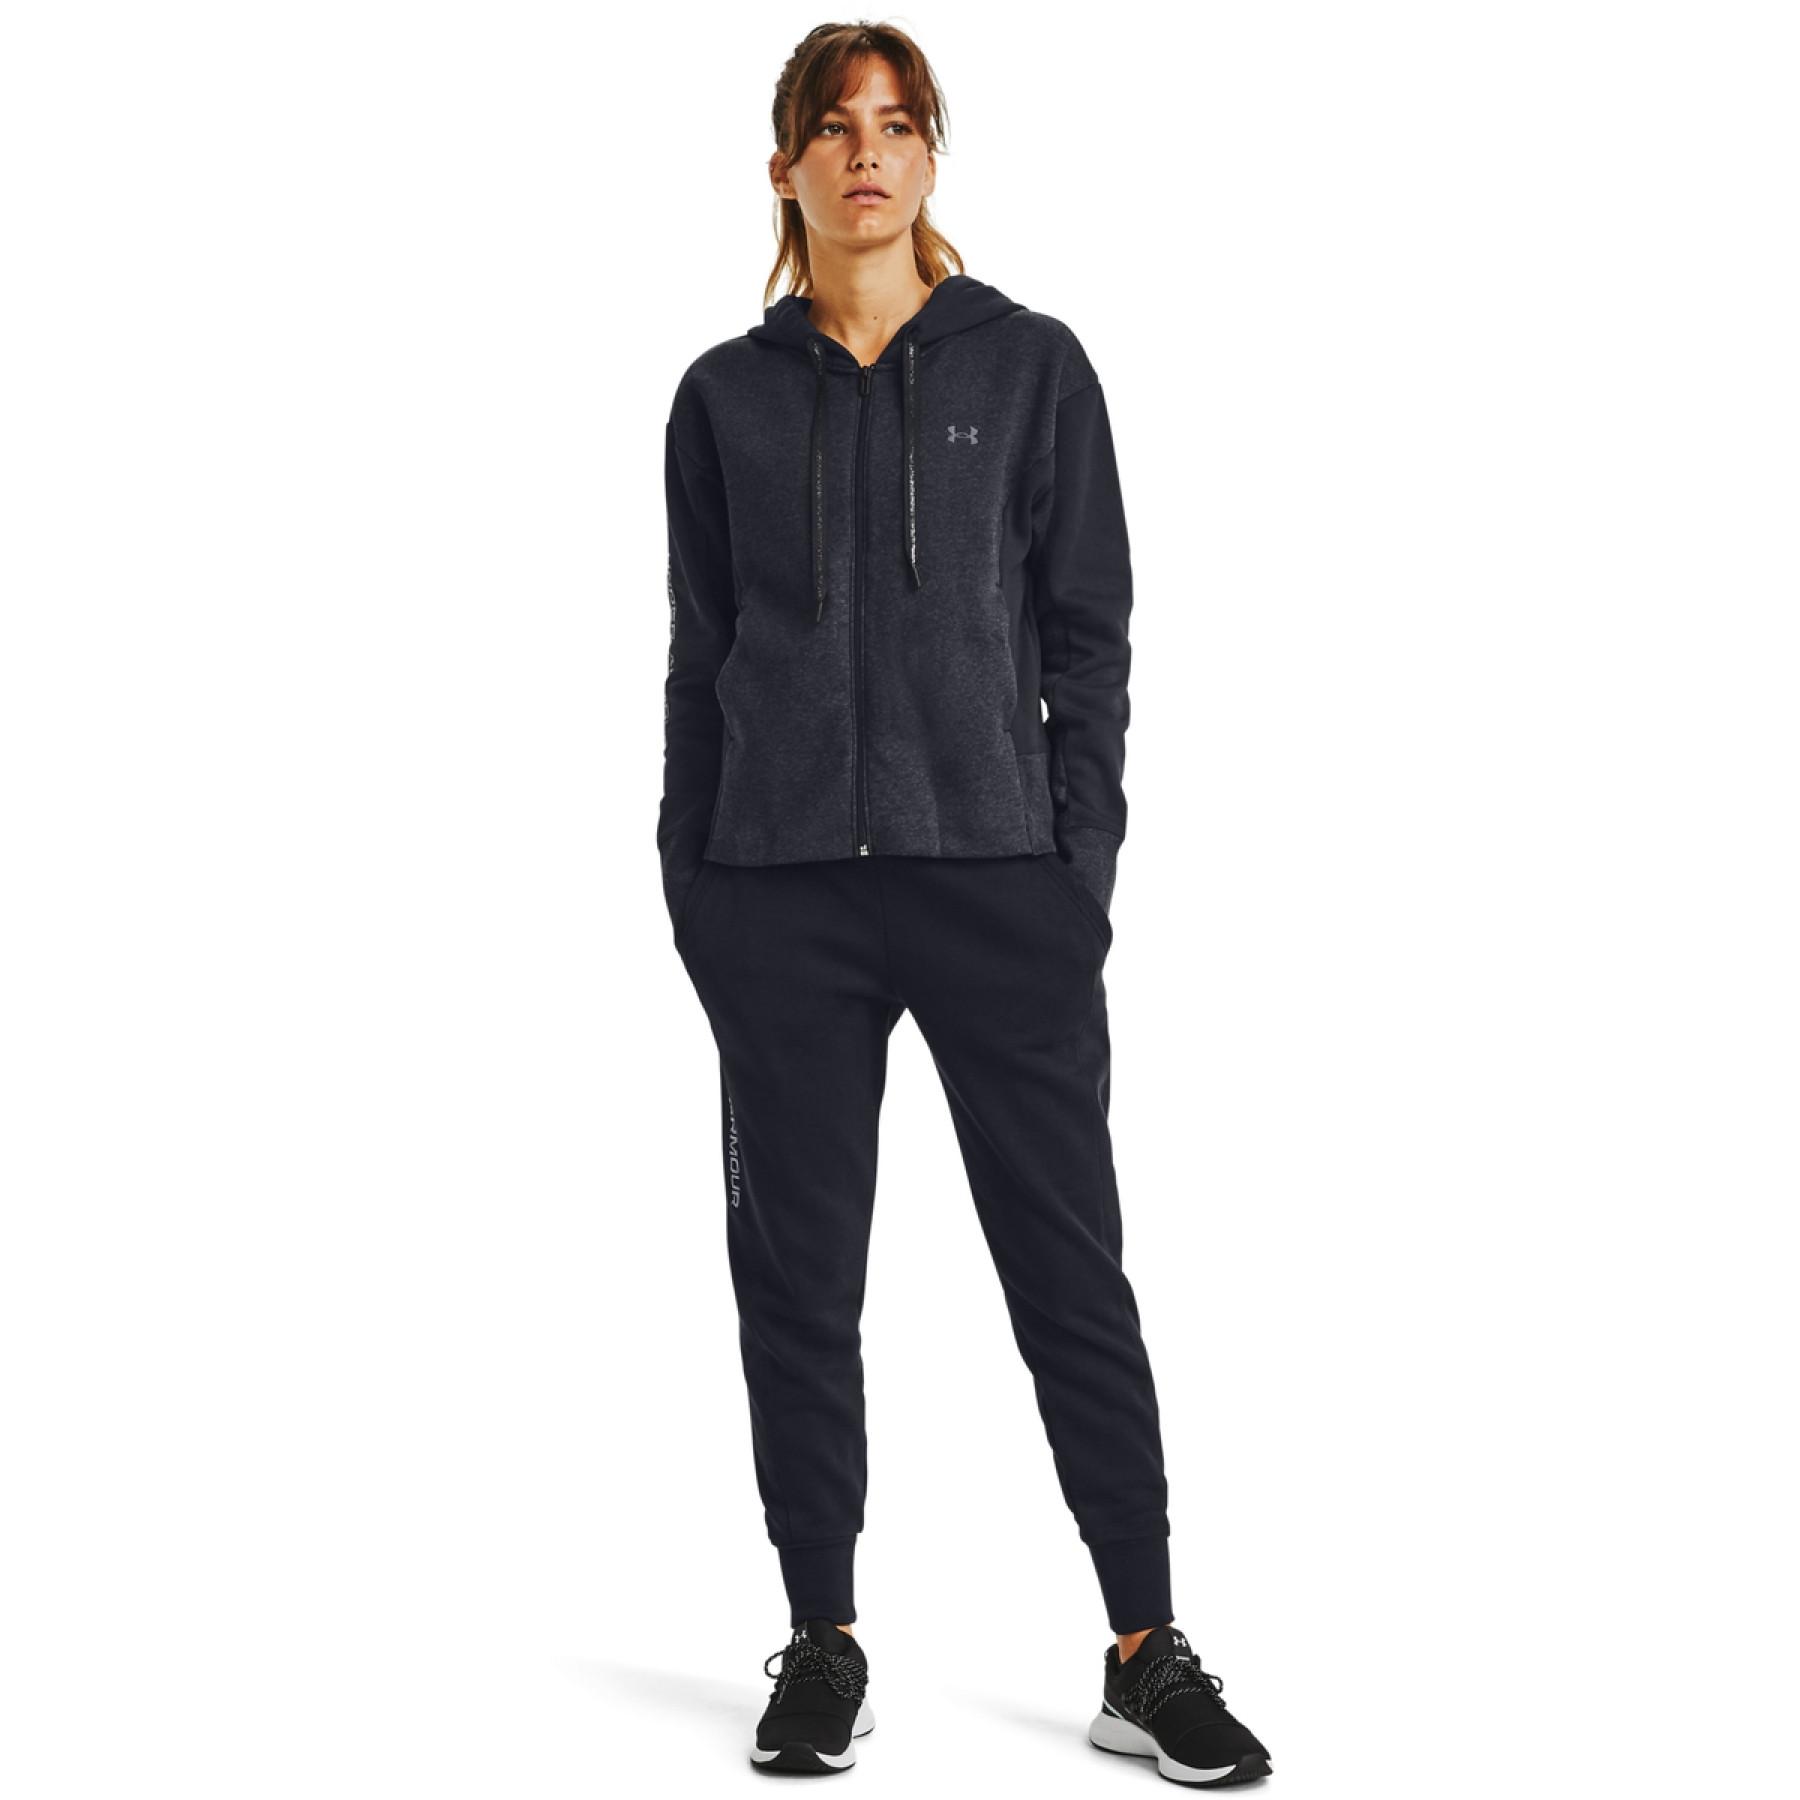 Sweat à capuche femme Under Armour Rival Fleece Embroidered Full Zip